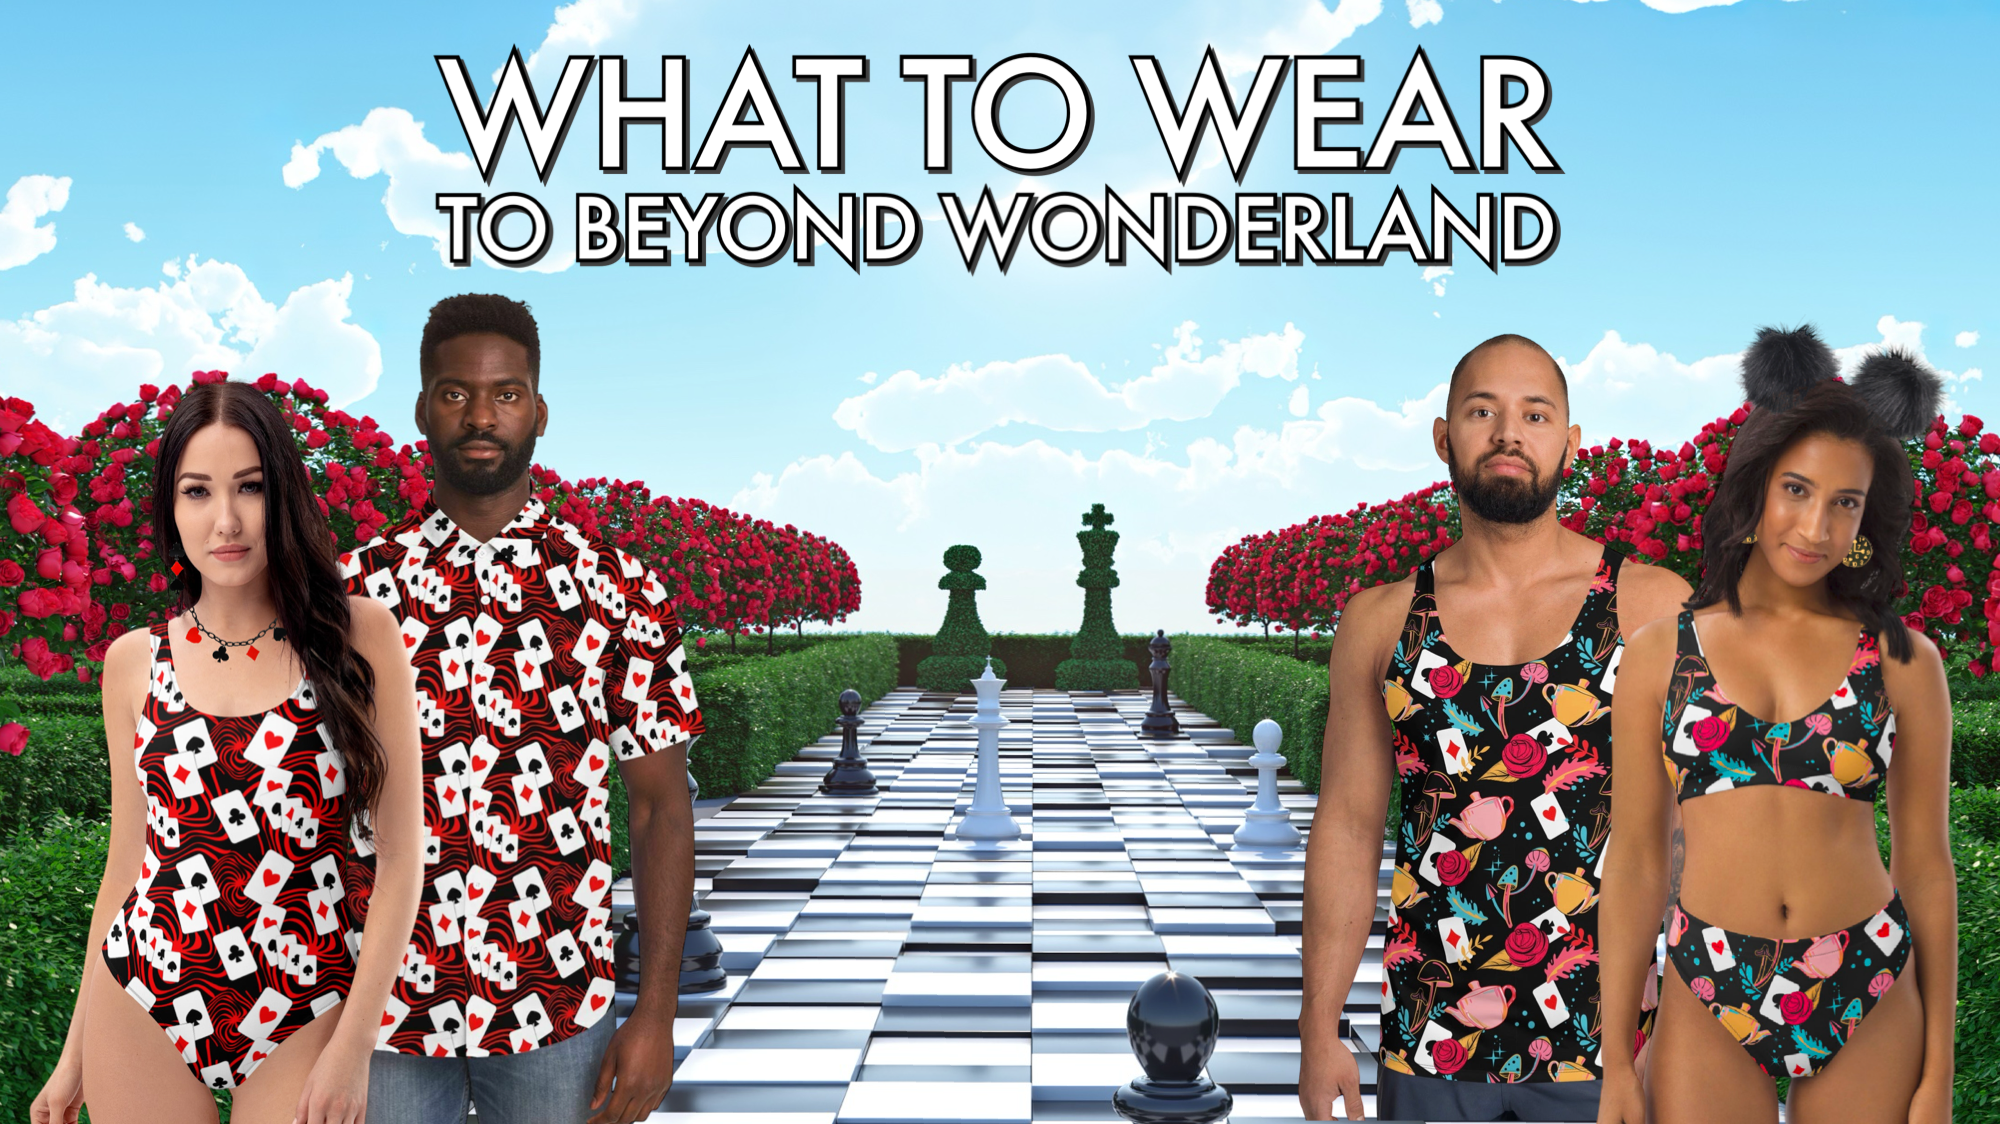 Beyond wonderland-alice and wonderland themed rave outfit. This